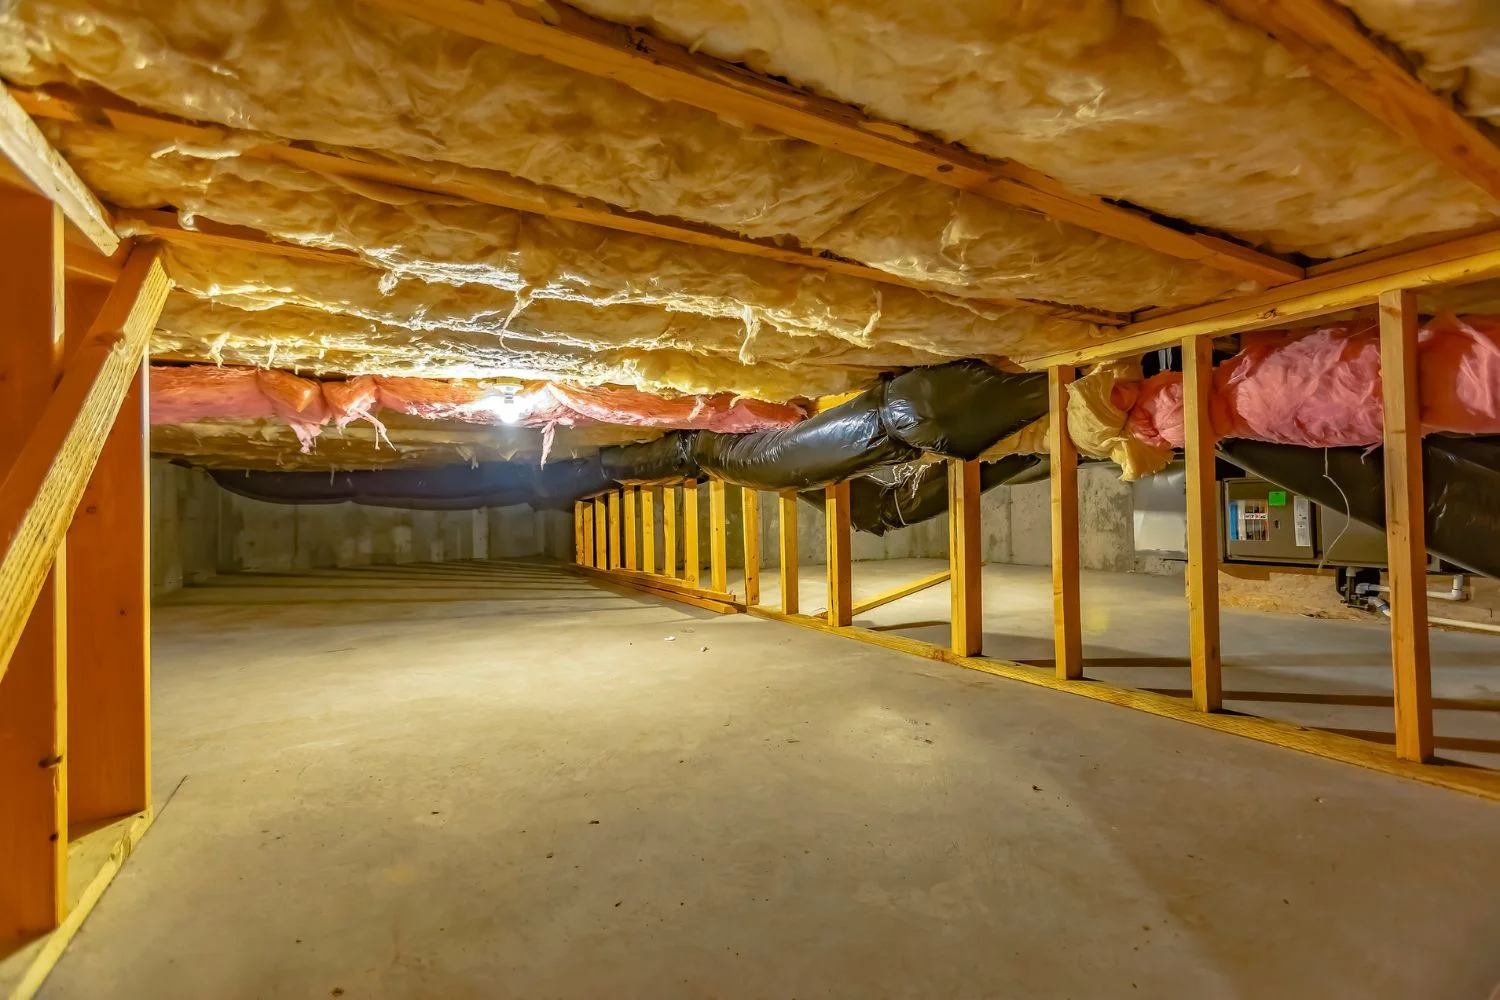 How To Get Rid Of Crawl Space Smell In House